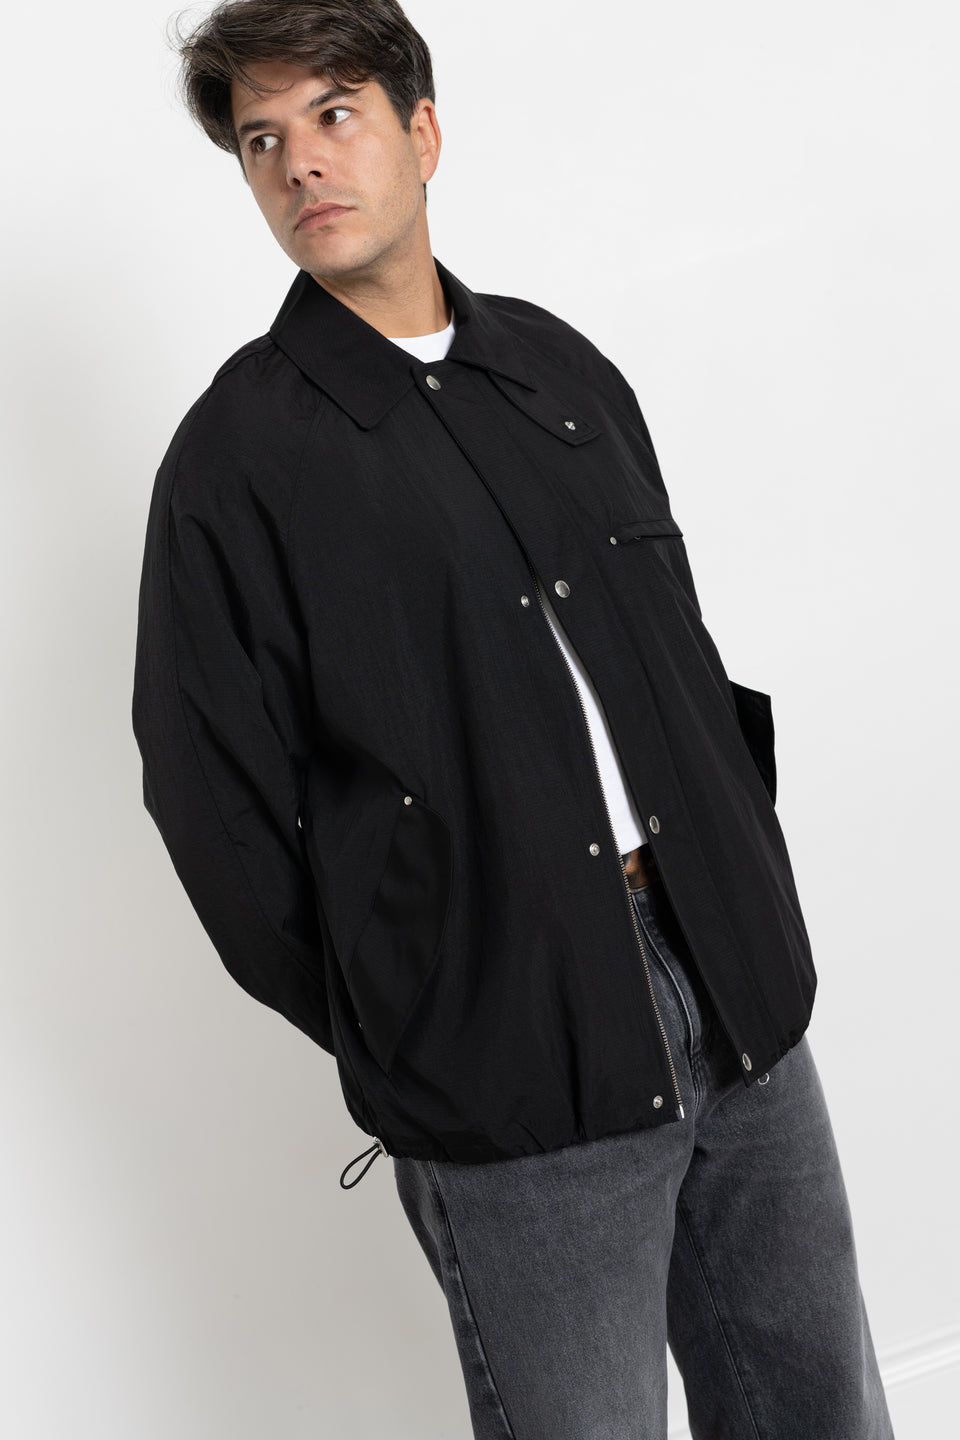 mfpen AW23 or FW23 Men's Collection Prestige Jacket Recycled Black Ripstop Recycled Nylon Calculus Victoria BC Canada